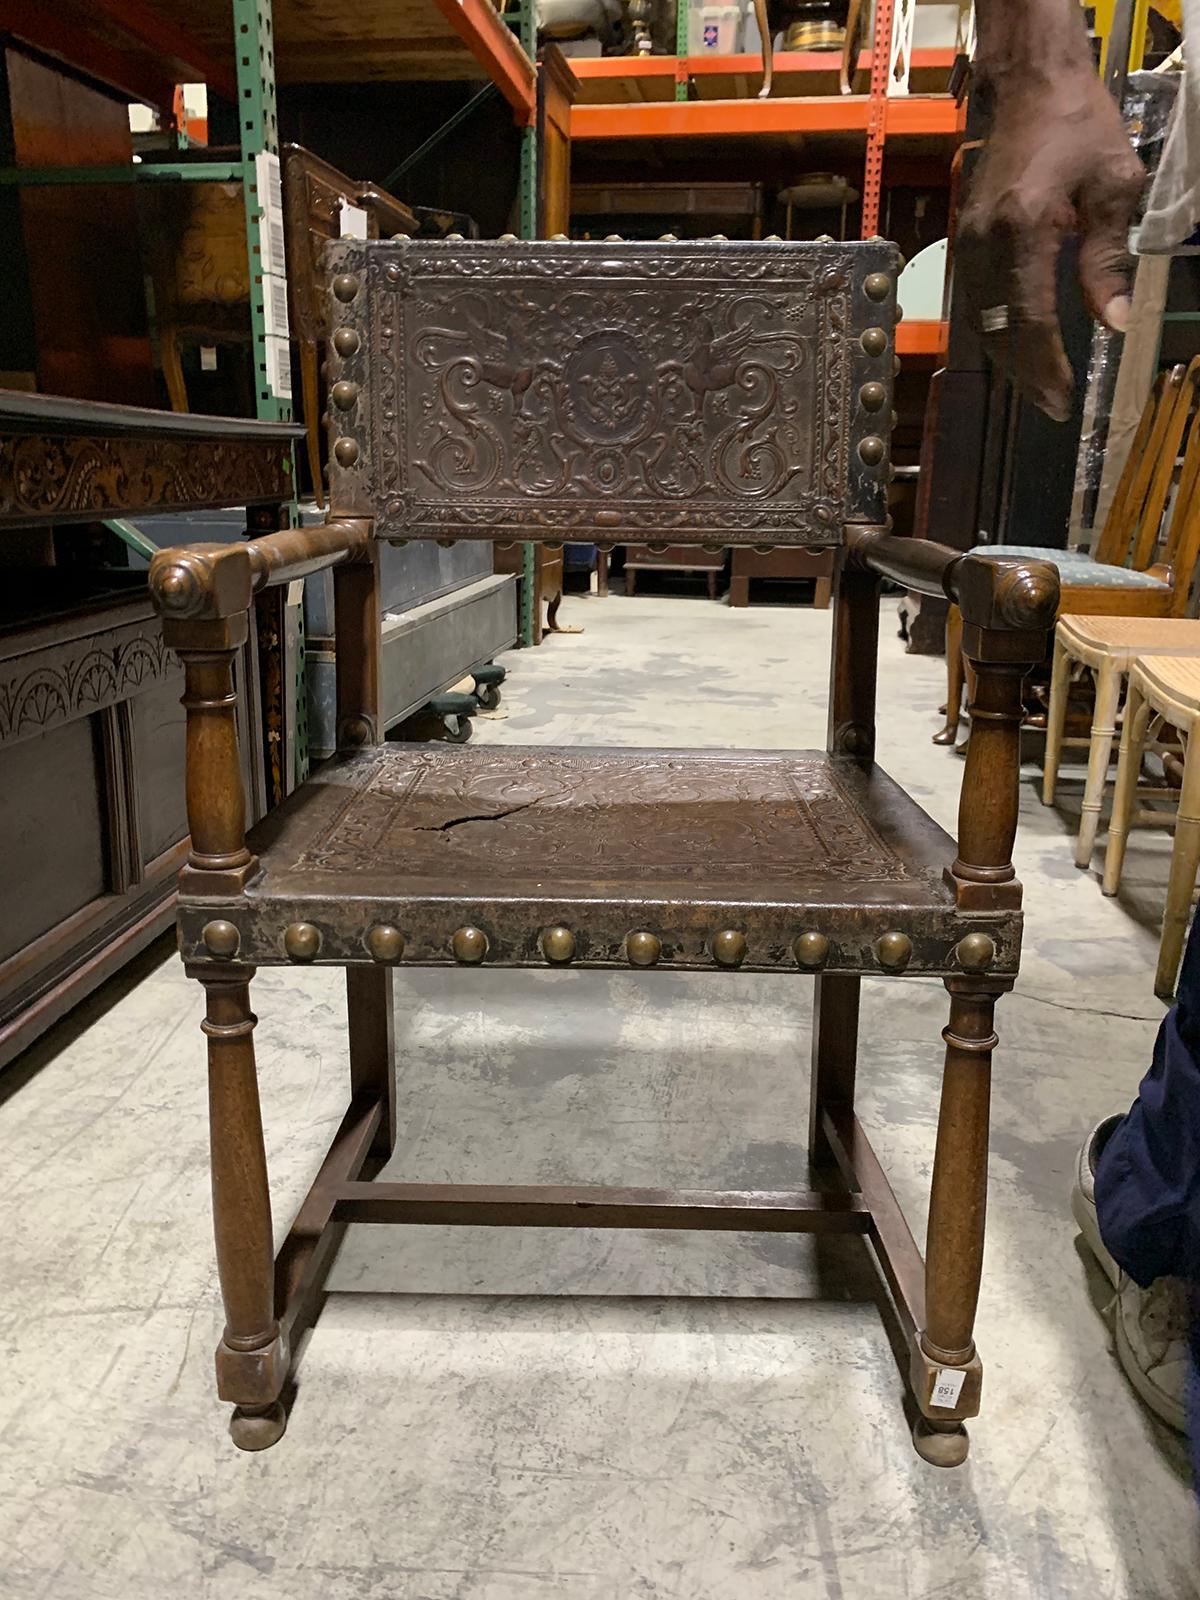 19th-20th century Italian armchair with embossed leather
Measures: 21.5